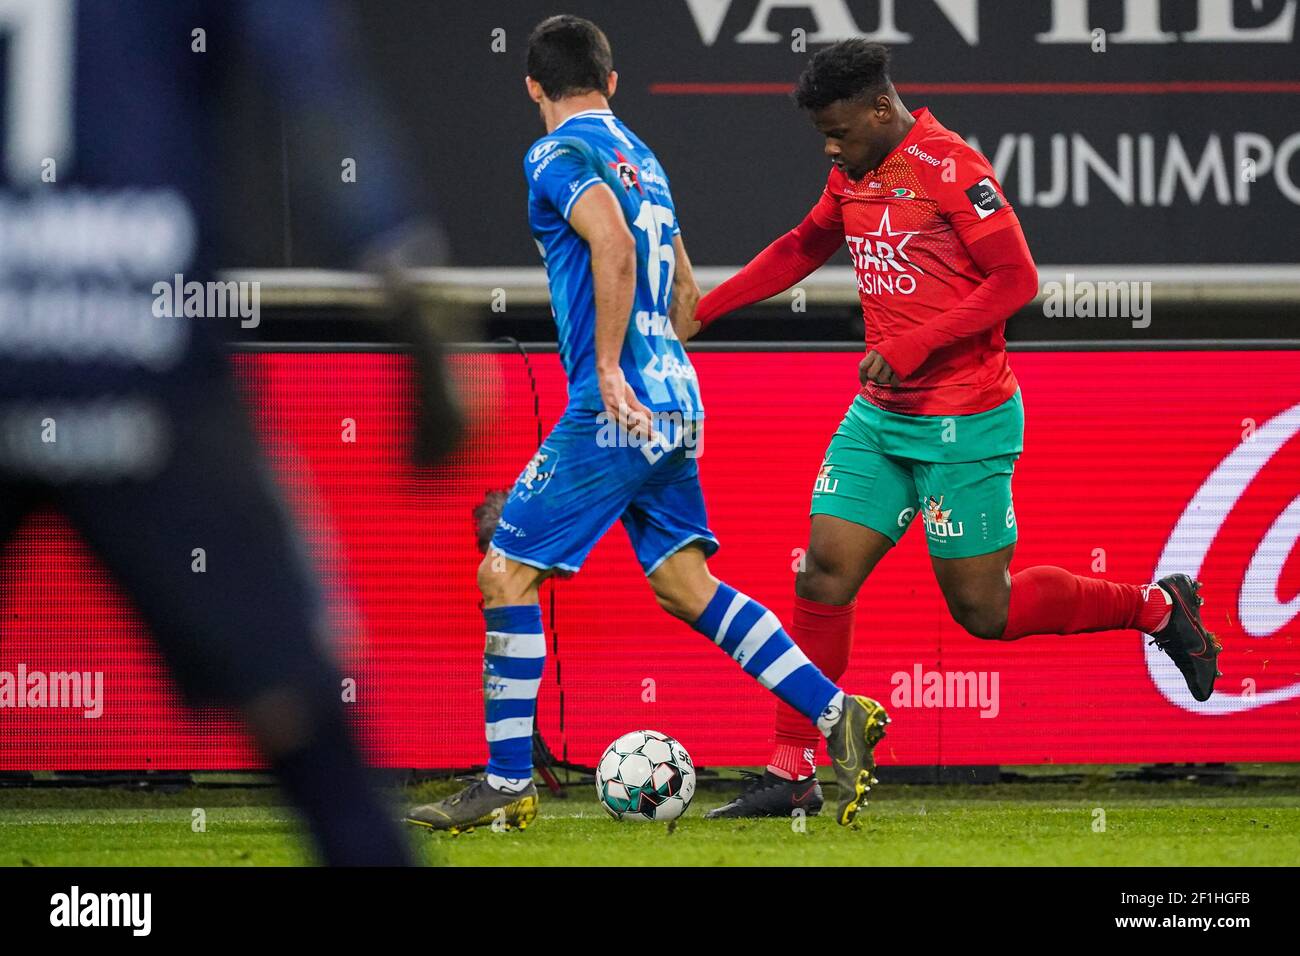 GENT, BELGIUM - MARCH 8: Mamadou Thiam of KV Oostende and Milad Mohammadi of KAA Gent during the Jupiler Pro League match between KAA Gent and KV Oost Stock Photo